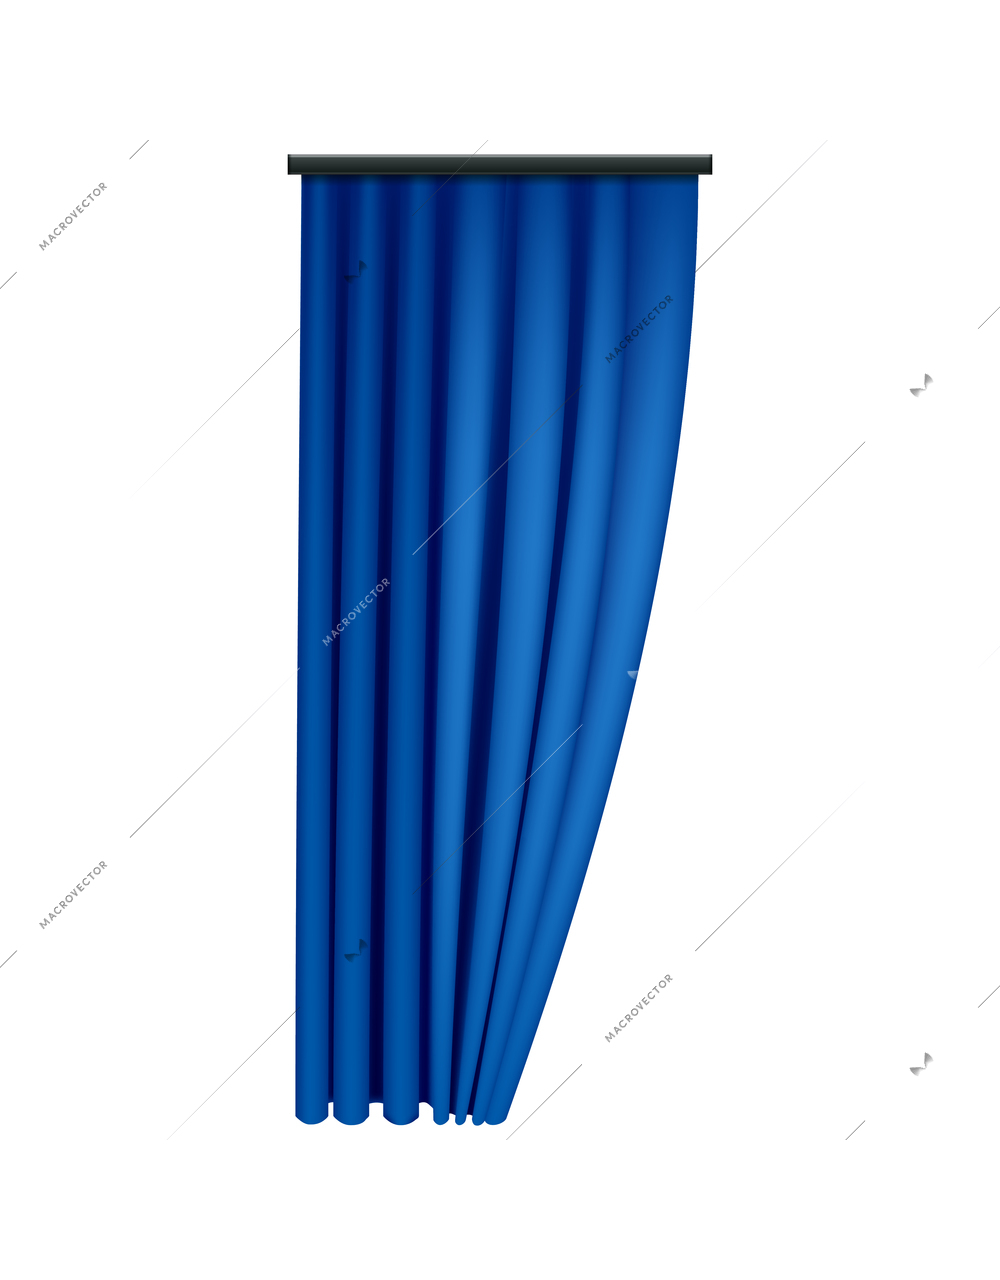 Realistic blue curtains composition with isolated image of luxury curtain hanging on rail vector illustration